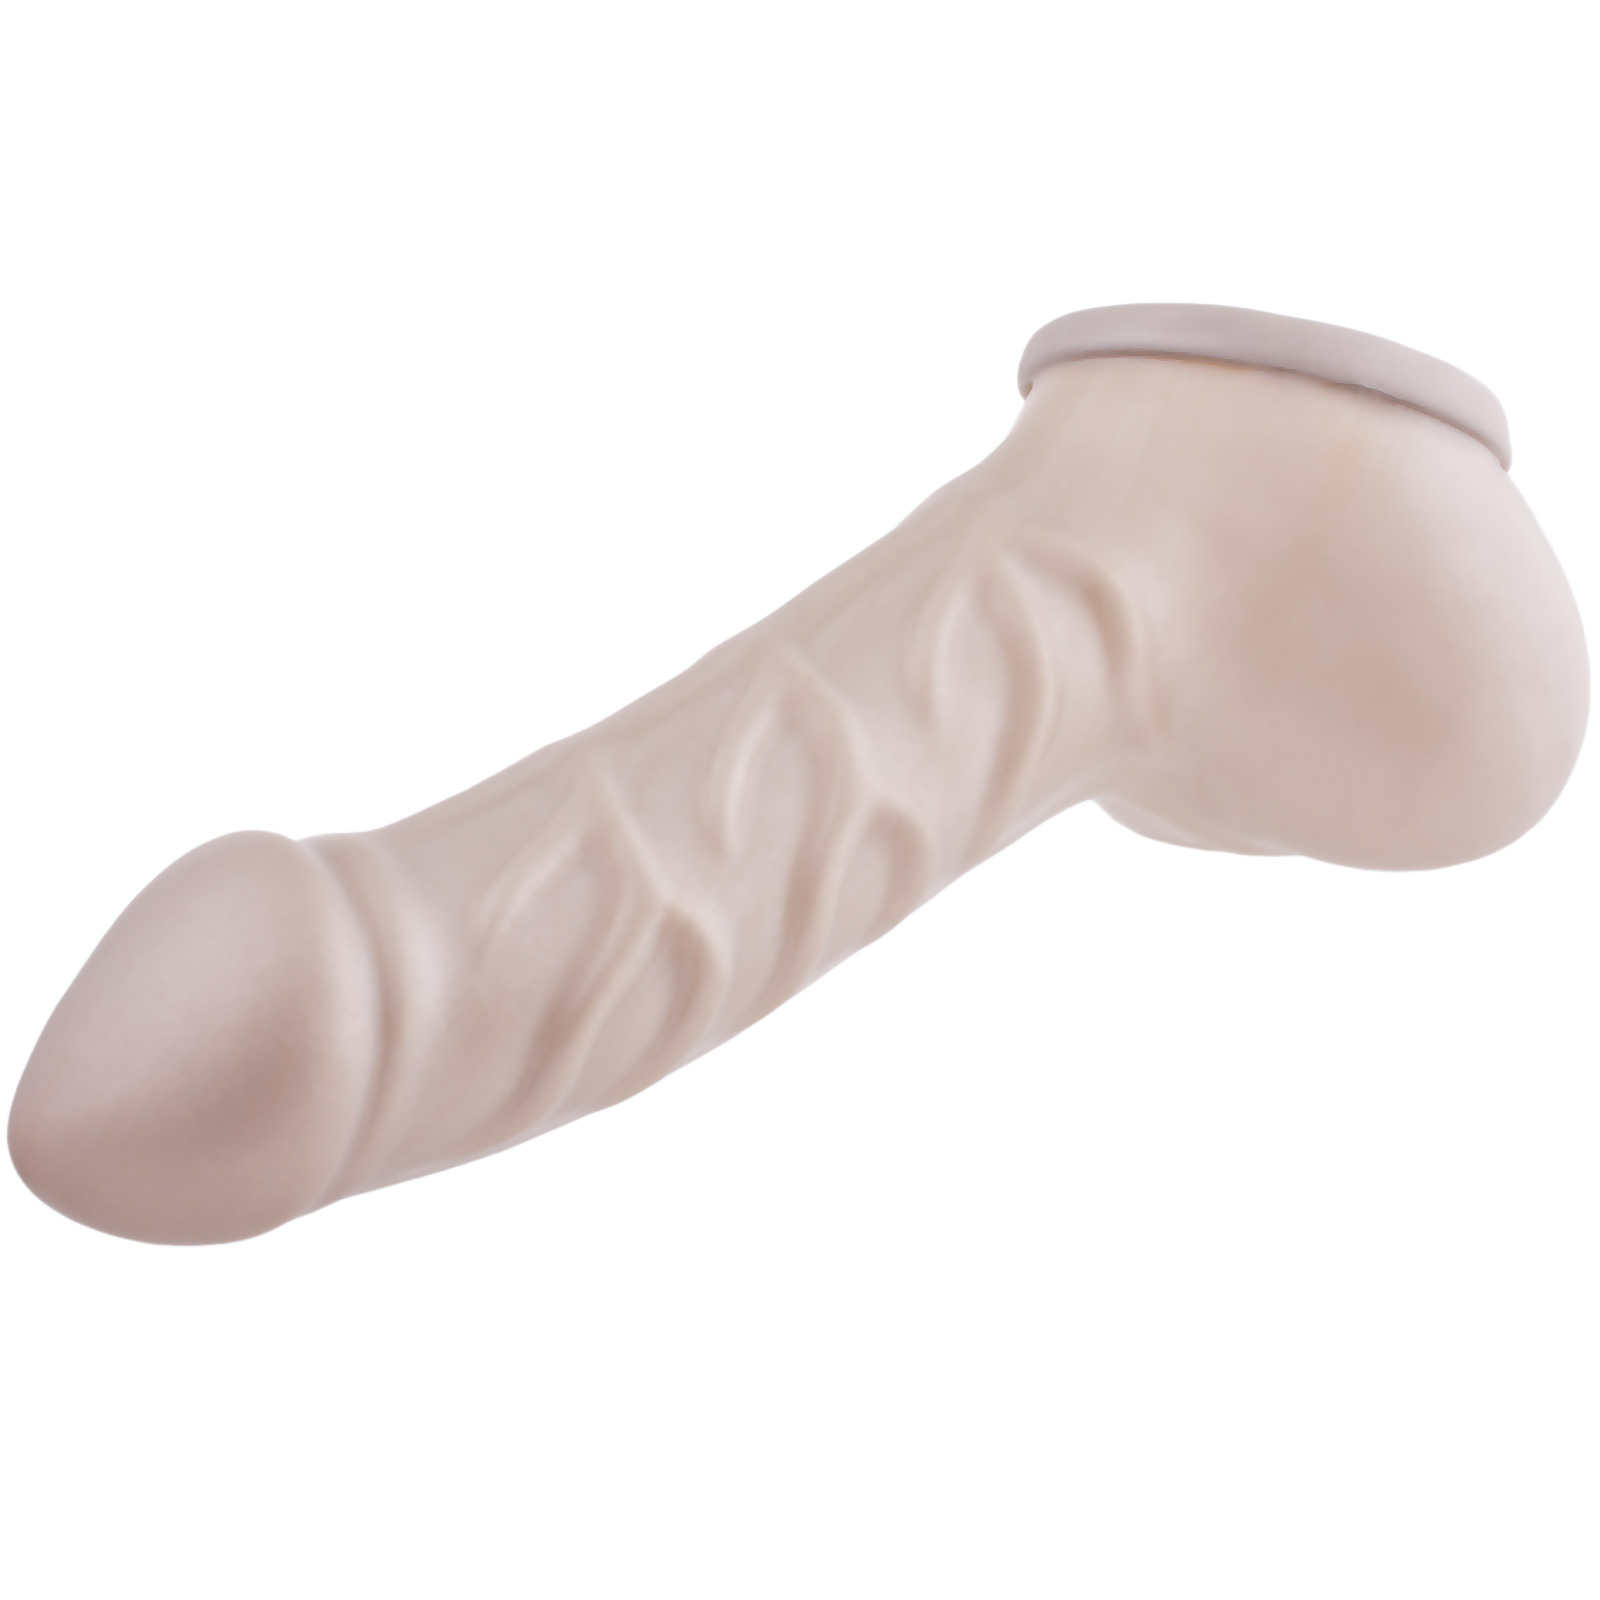 Toylie Latex Penis Sleeve «FRANZ» silver, with strong veins and molded scrotum